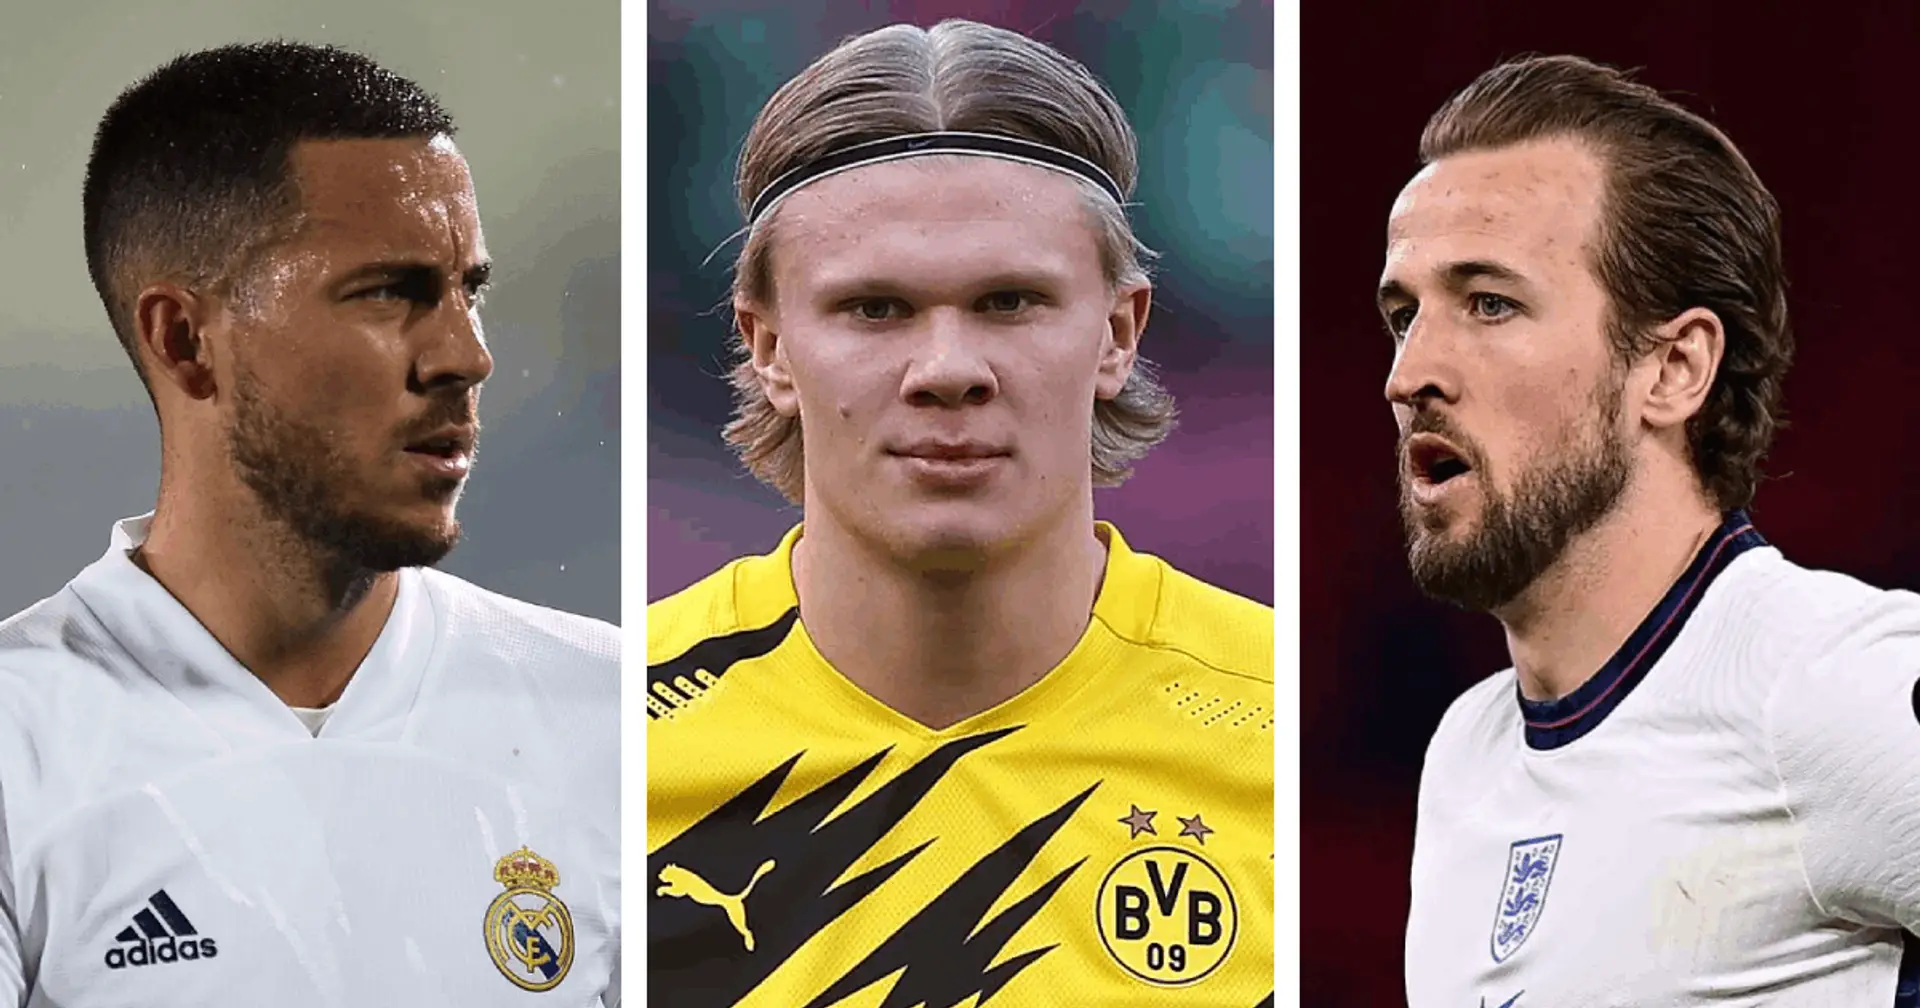 Erling Haaland to join Real Madrid this summer & 3 more transfer rumours you should believe the least